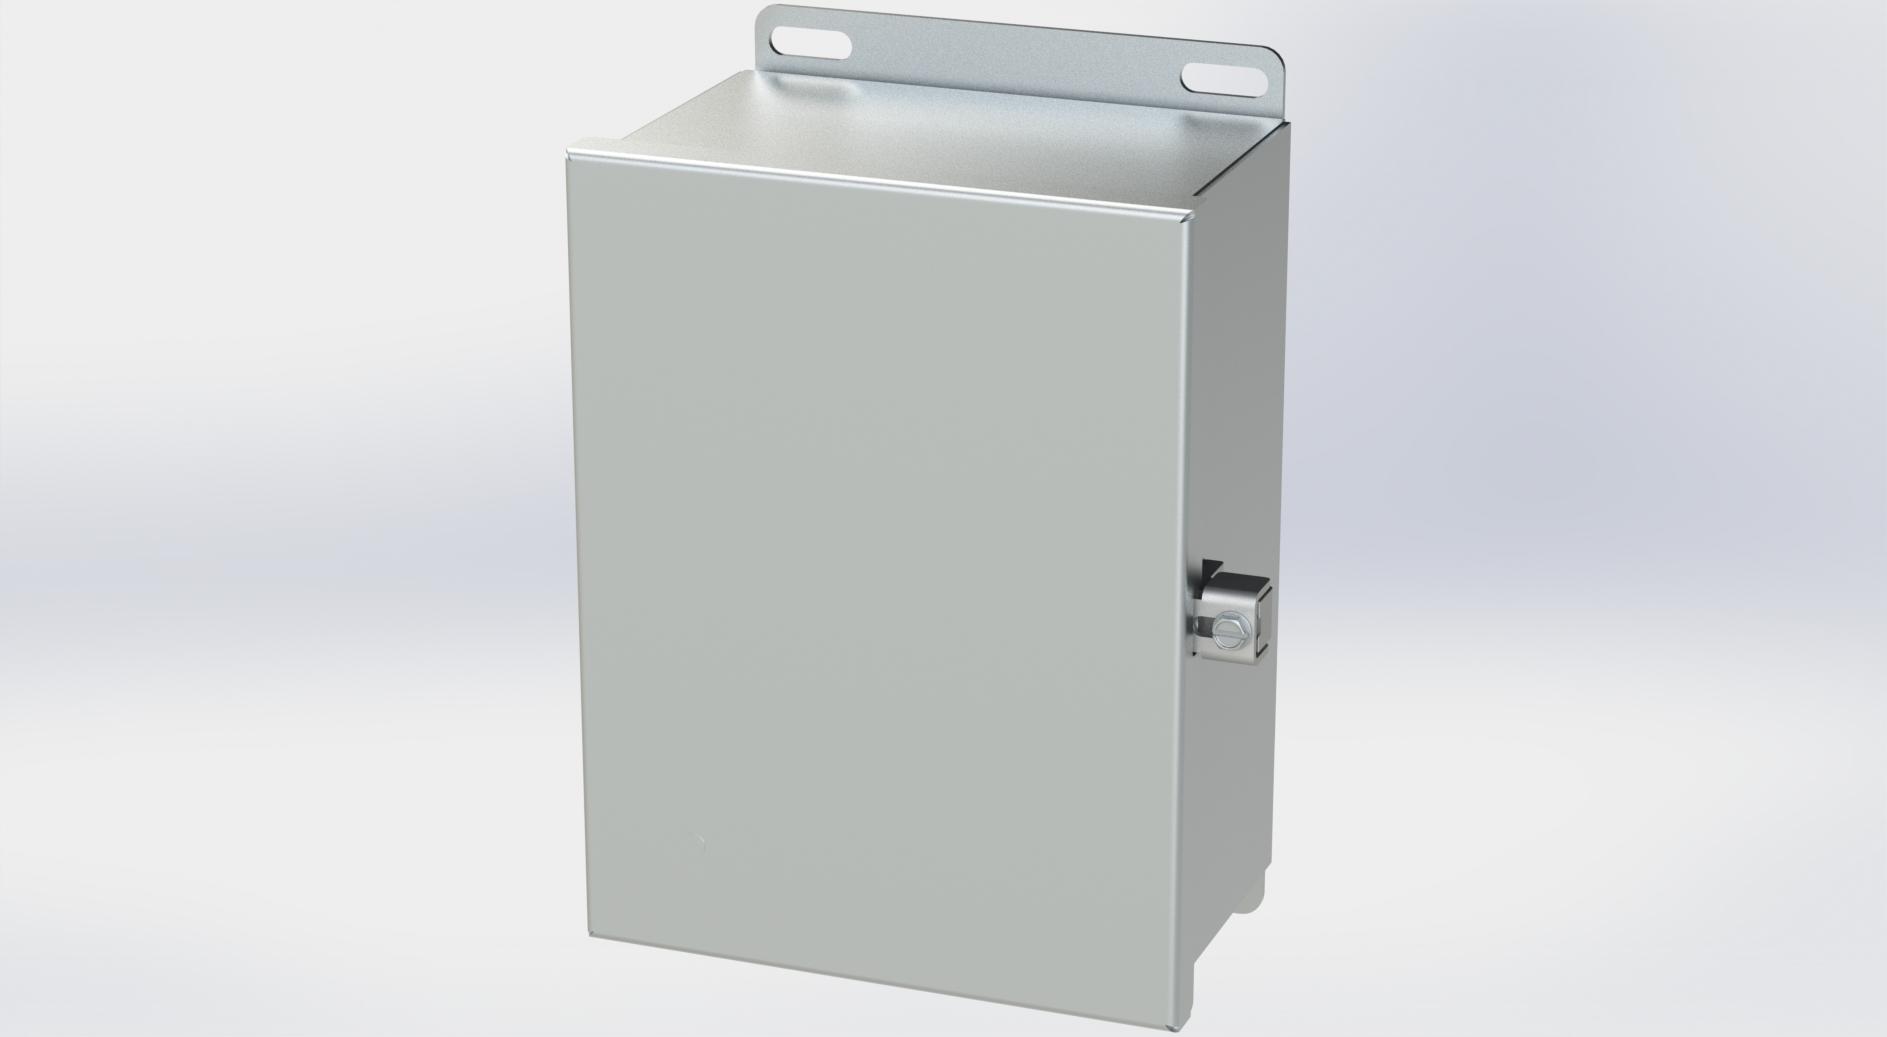 Saginaw Control SCE-8064CHNFSS S.S. CHNF Enclosure, Height:8.13", Width:6.00", Depth:4.00", #4 brushed finish on all exterior surfaces. Optional sub-panels are powder coated white.